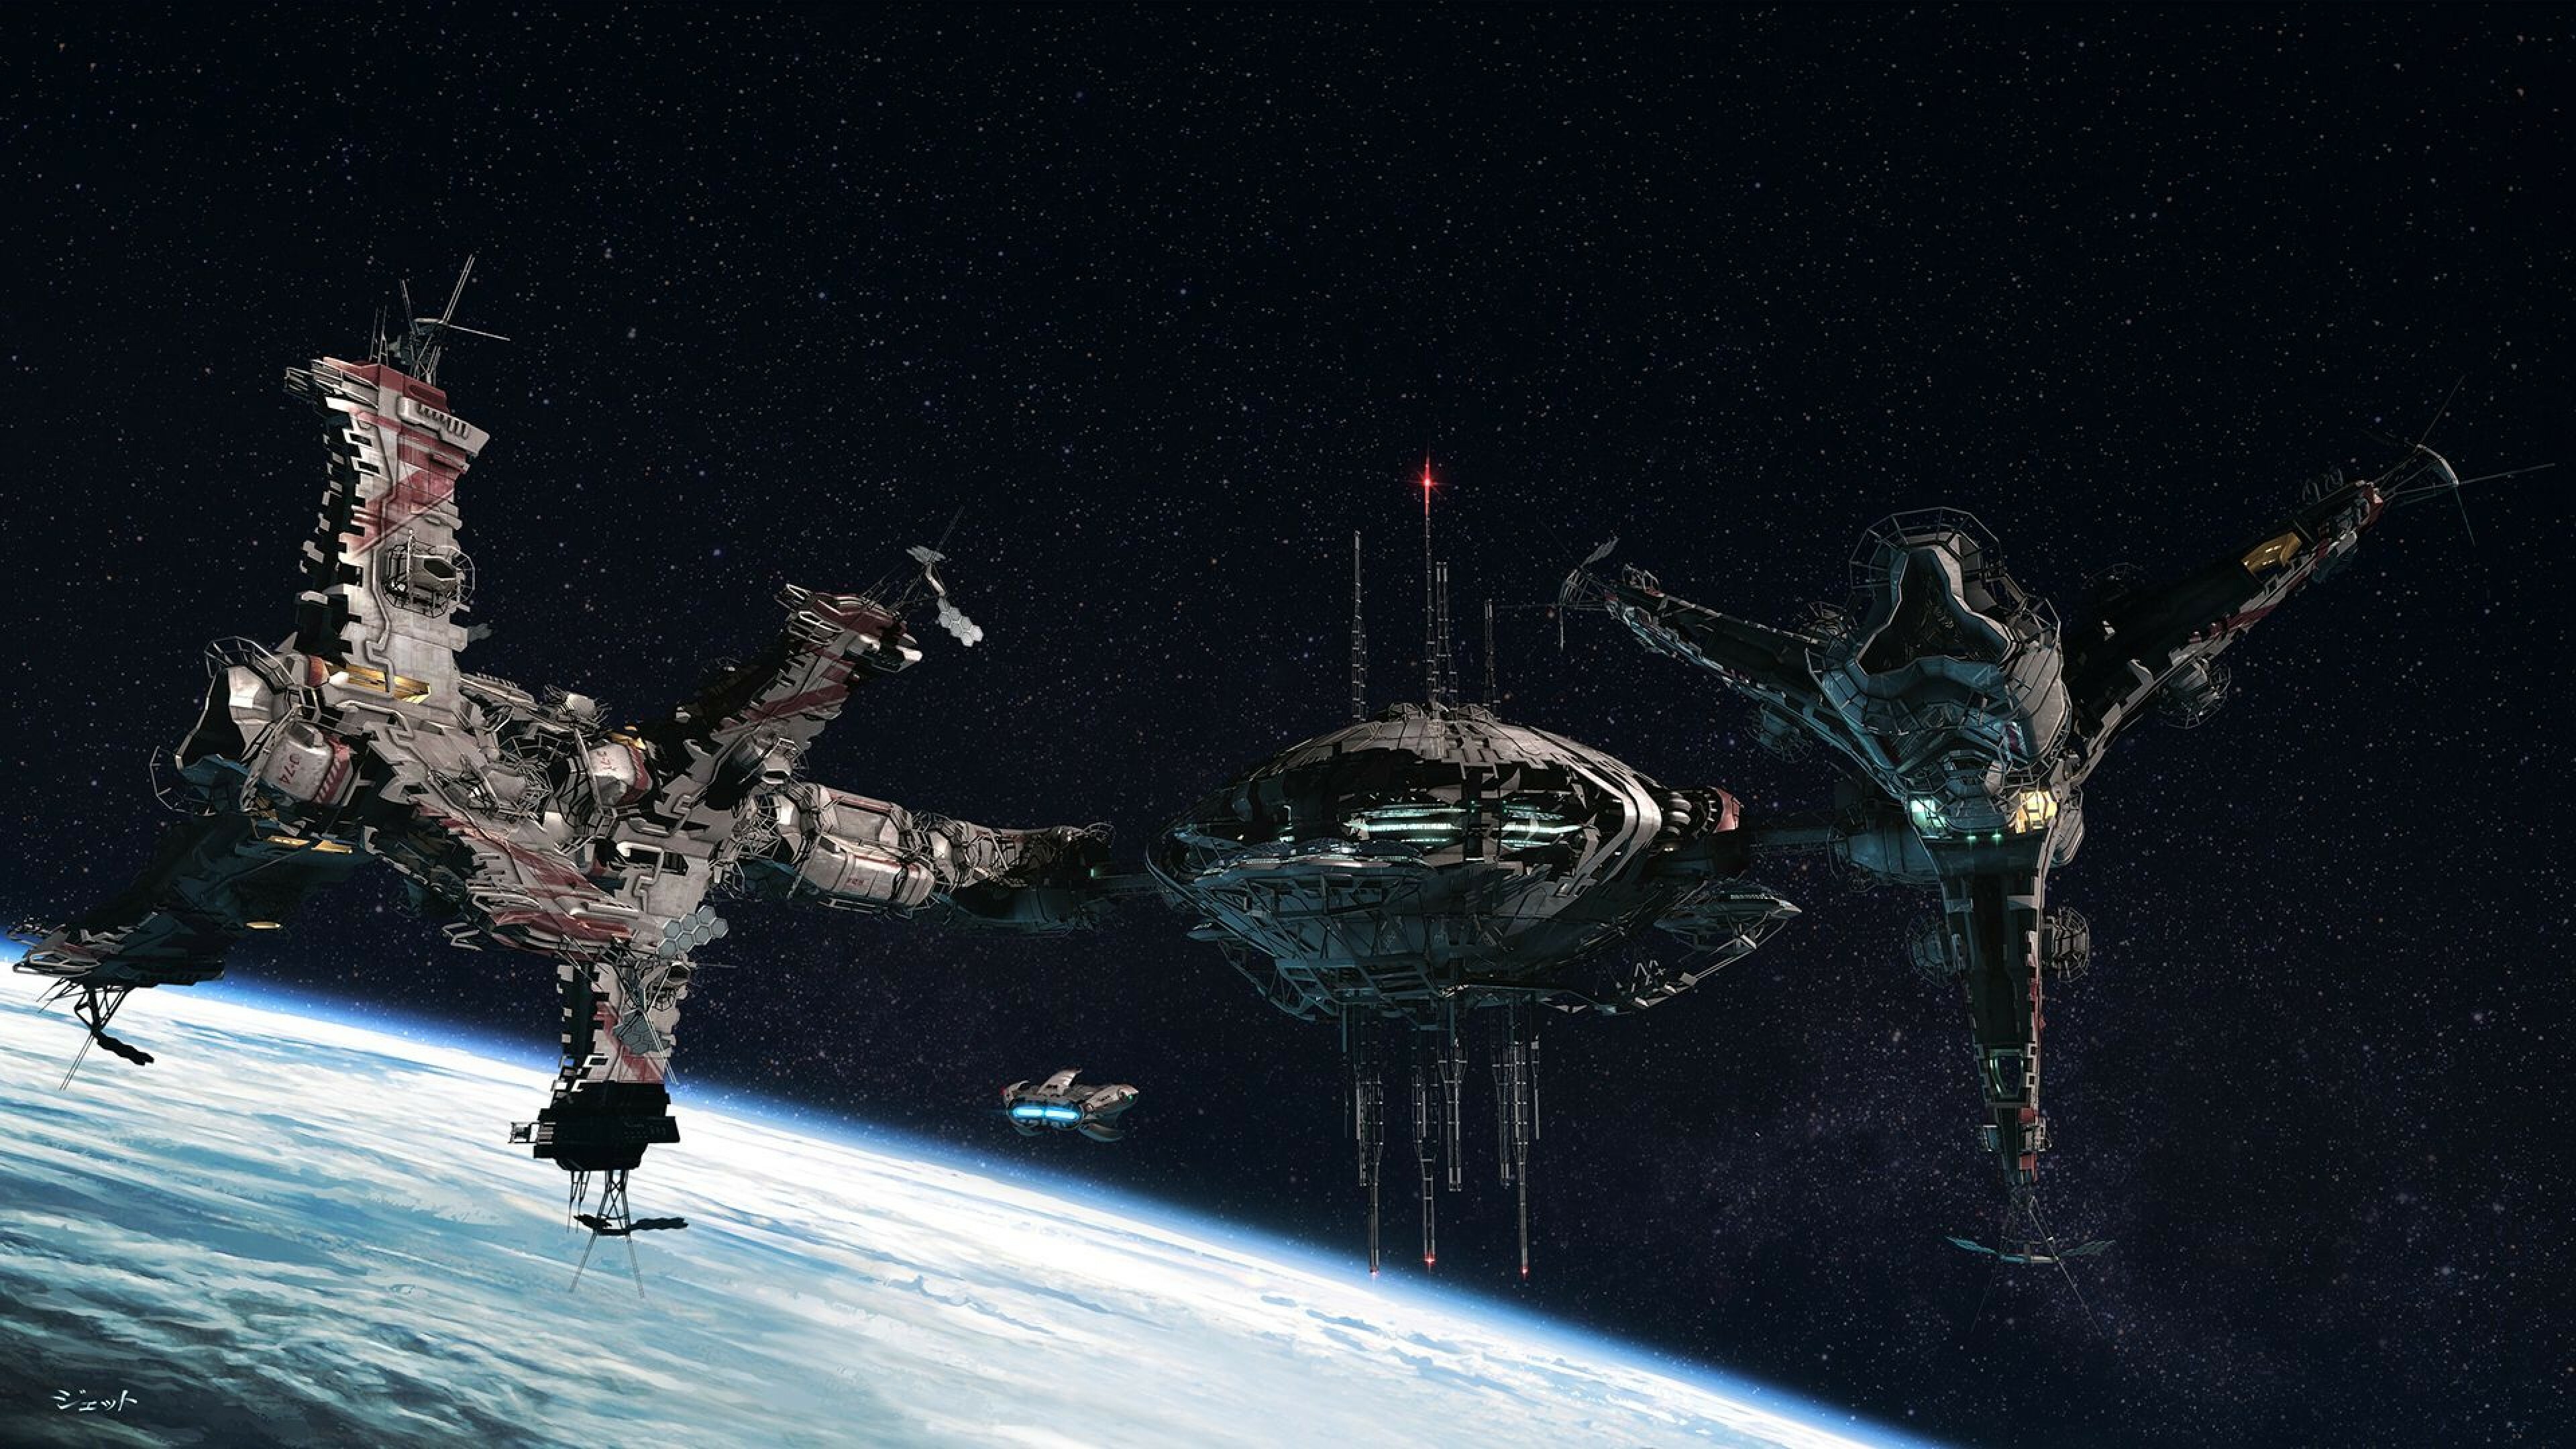 Space Station: Sci-Fi, A type of space habitat, An artificial satellite, Galaxy. 3840x2160 4K Wallpaper.